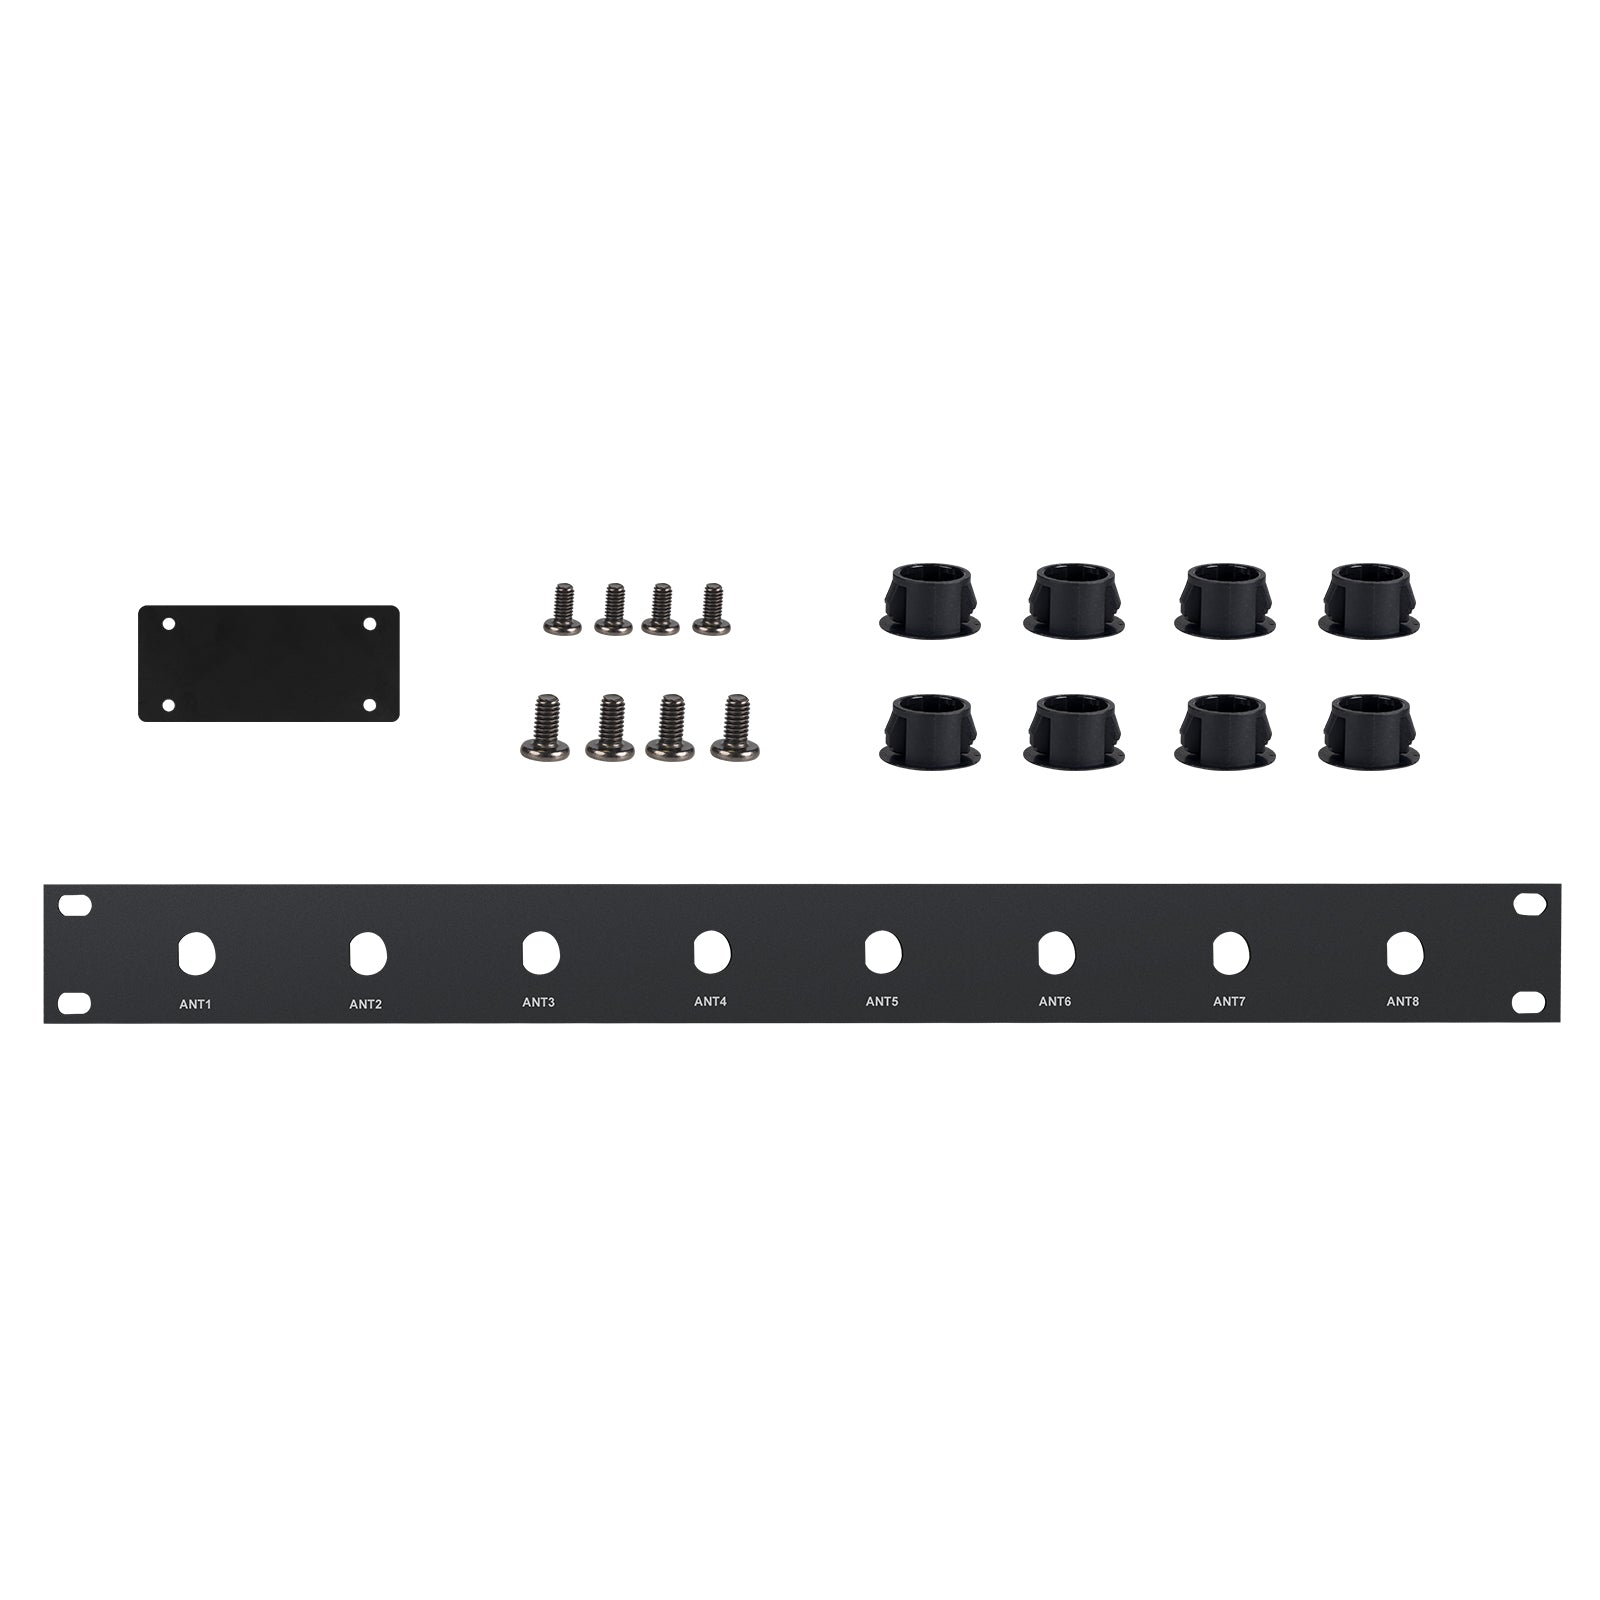 Phenyx Pro Dual Rack-mounting Kit for Wireless System